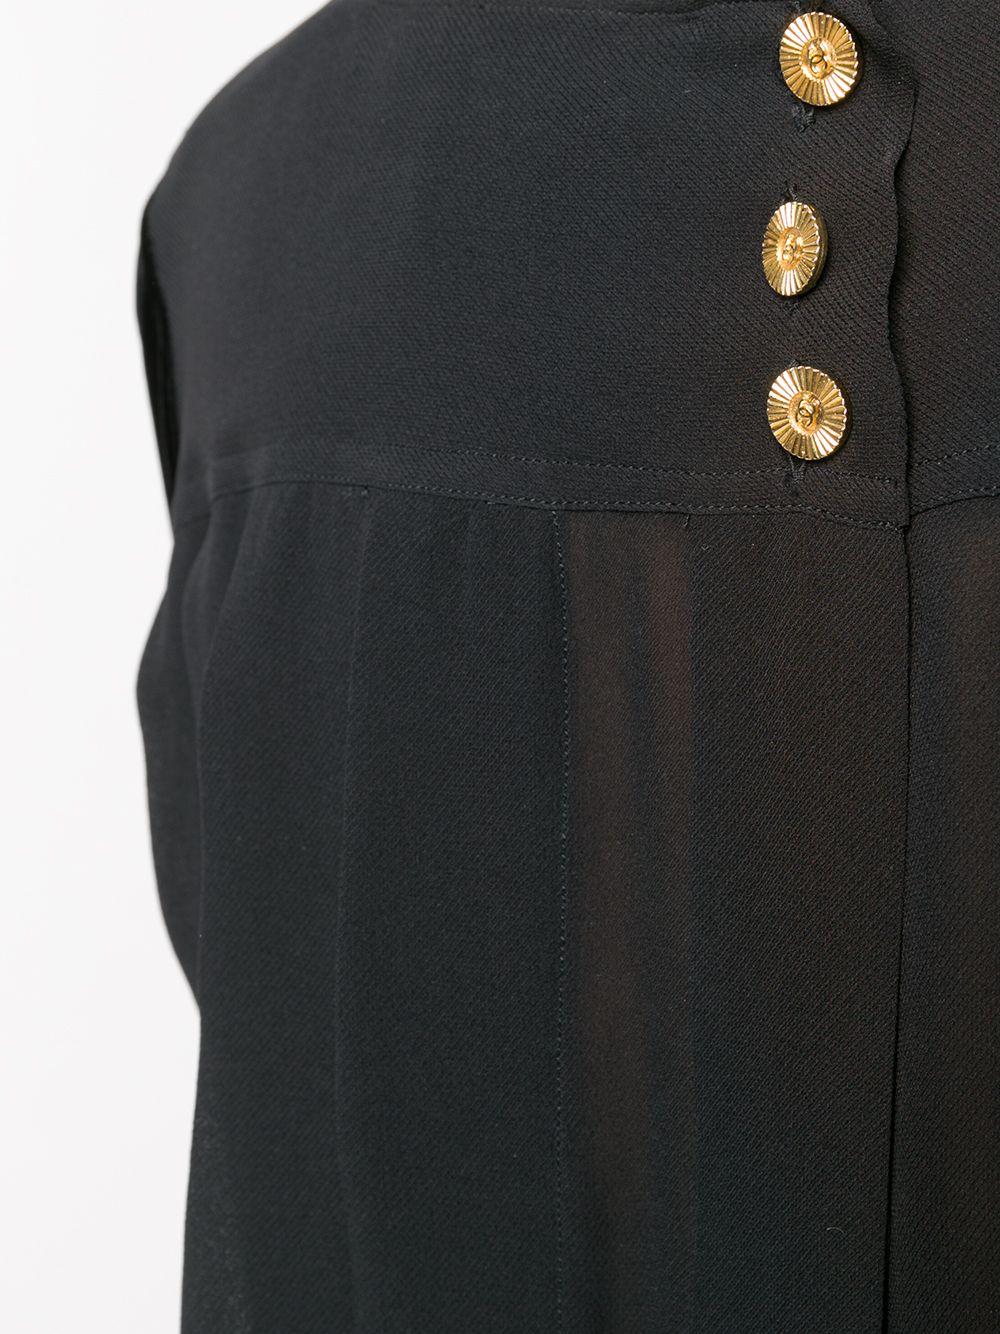 Expertly crafted in France from fluid black silk, this pre-owned black top from Chanel features long-sleeves, a round-neck collar and a straight hem design. The lateral pleated detailing at the front, gold-tone button fastening at the rear and